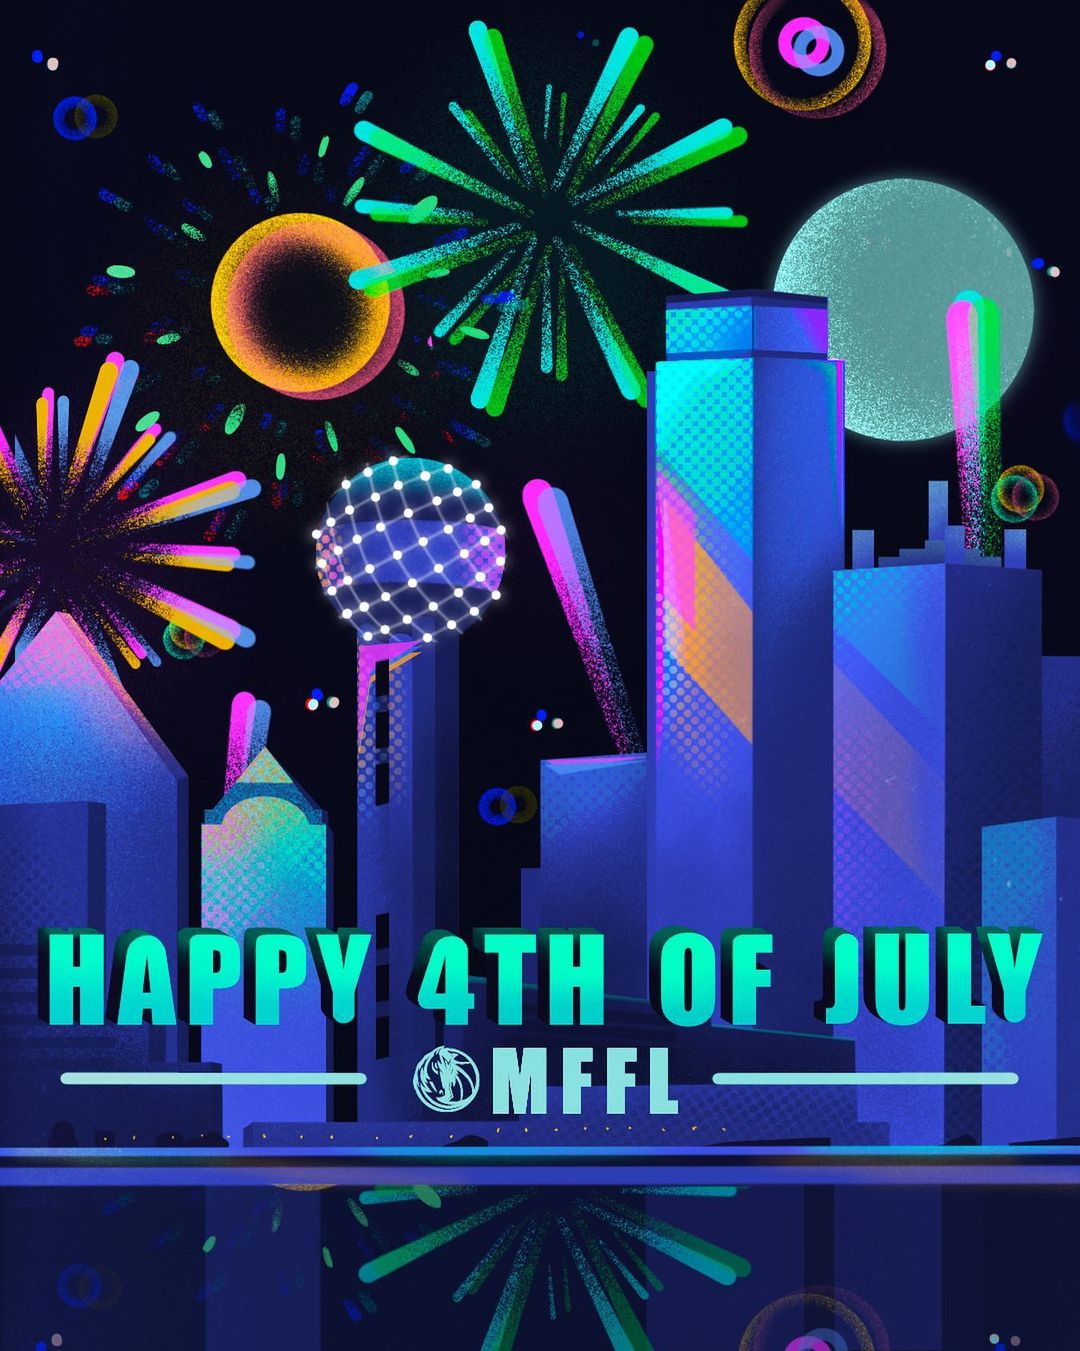 Wishing everyone a happy and safe 4th of July  #MFFL...